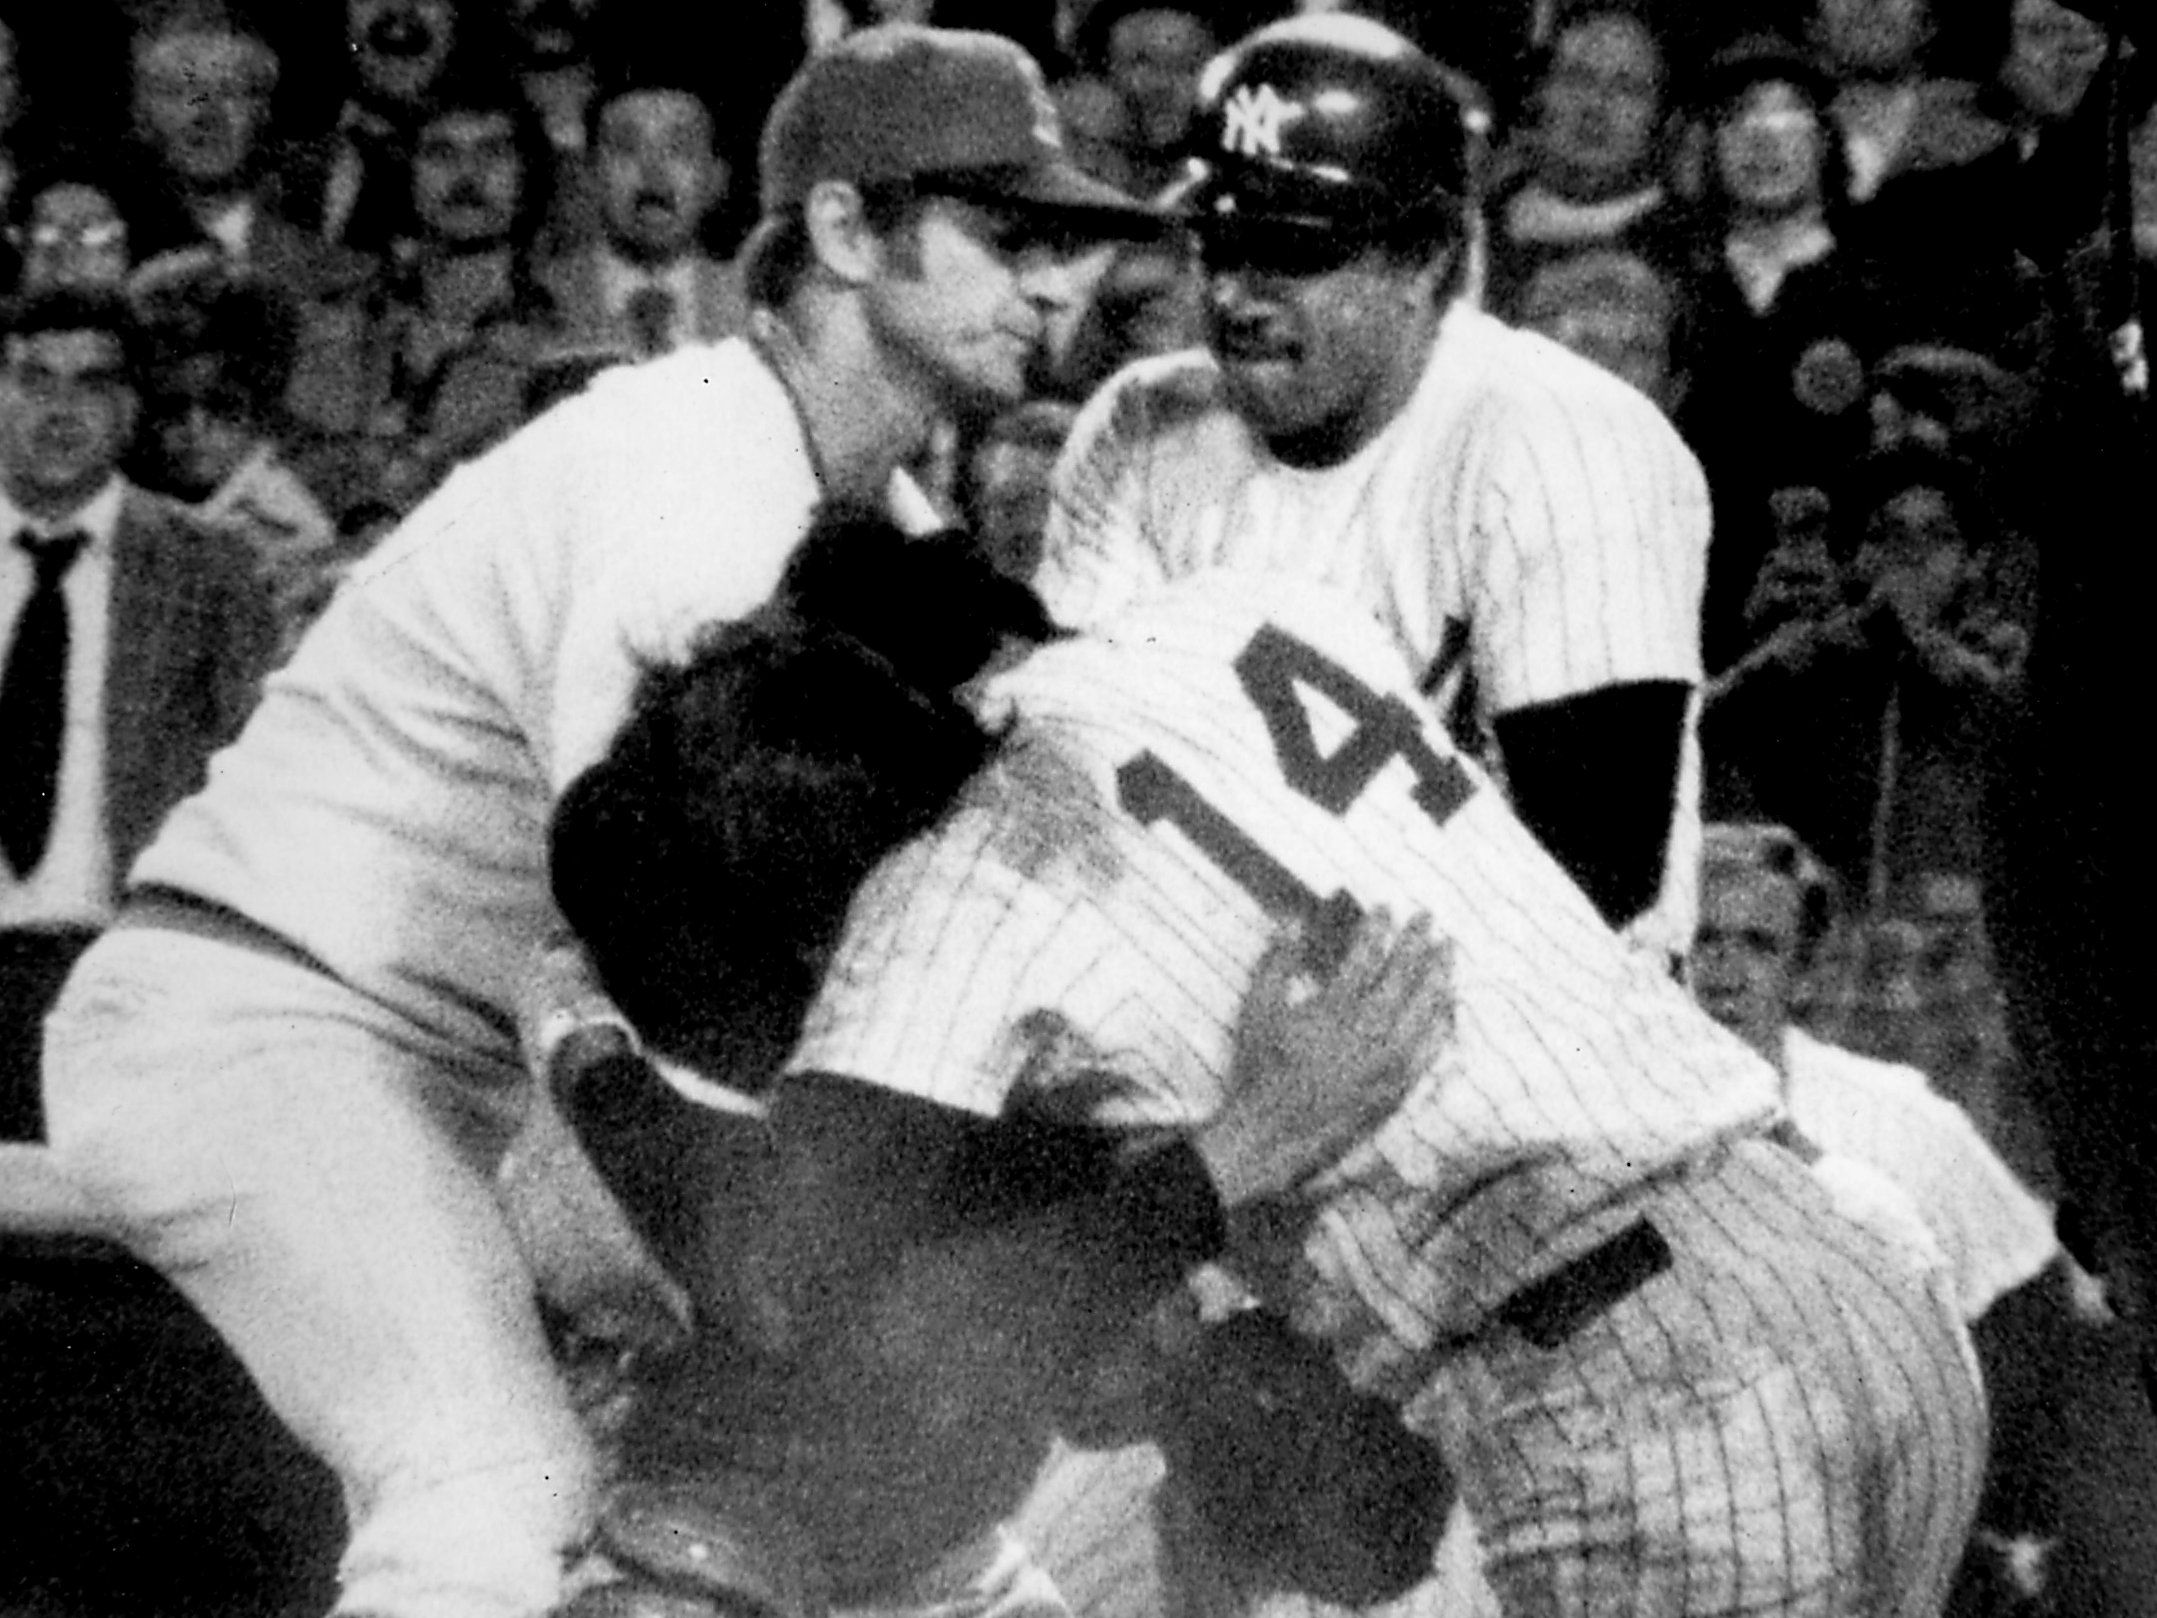 In 1976, there was a real battle in the Bronx - The Boston Globe